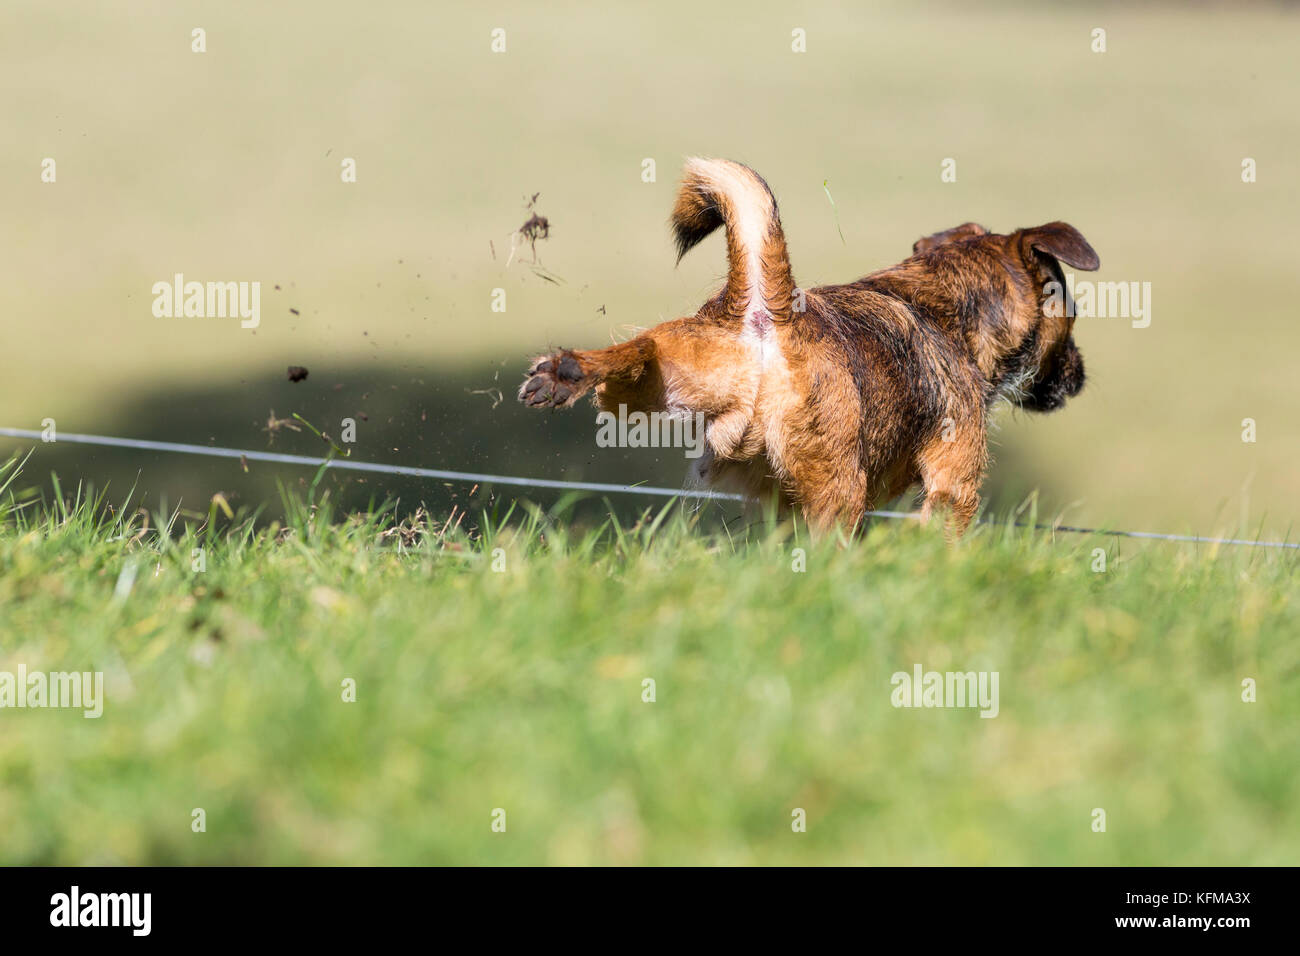 Border terrier cross pet dog kicking with hind legs, grass flying Stock Photo